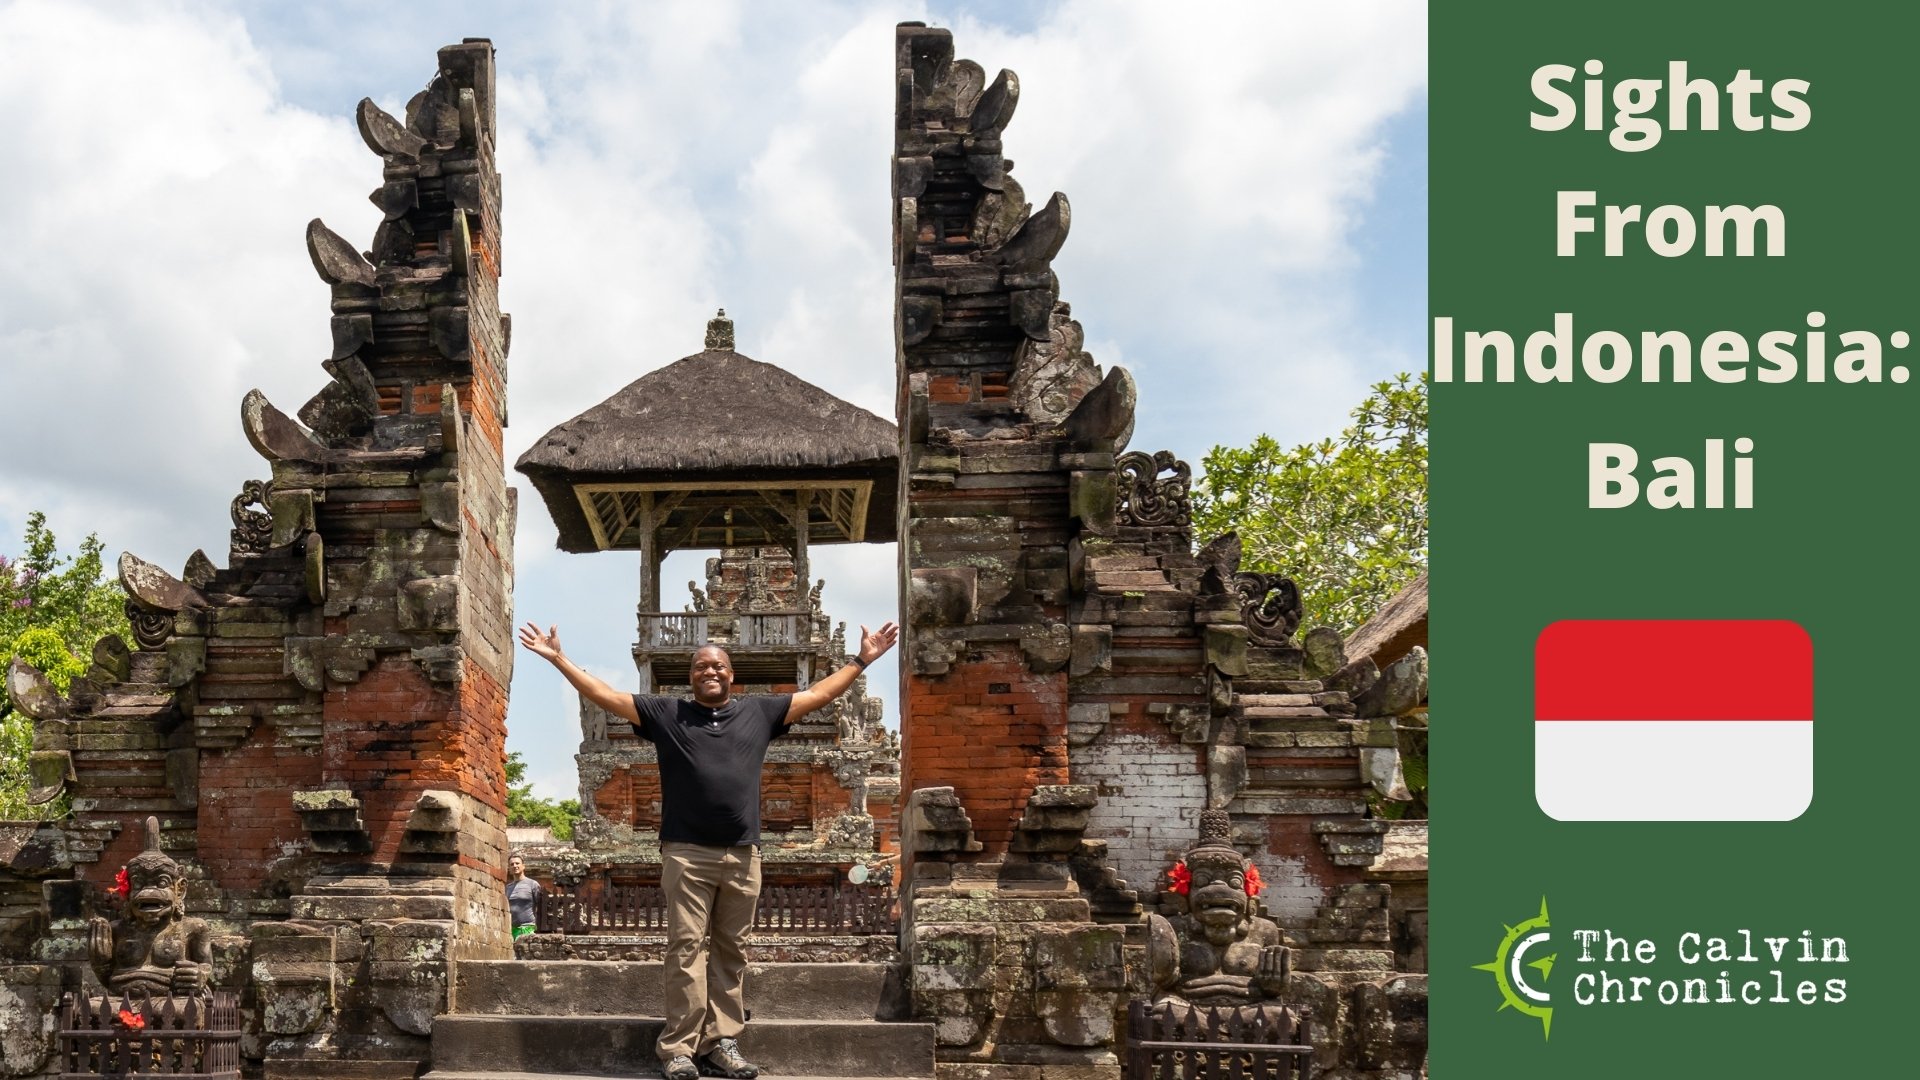 Sights from Indonesia: Highlights from Bali | Ubud and Kuta Indonesia